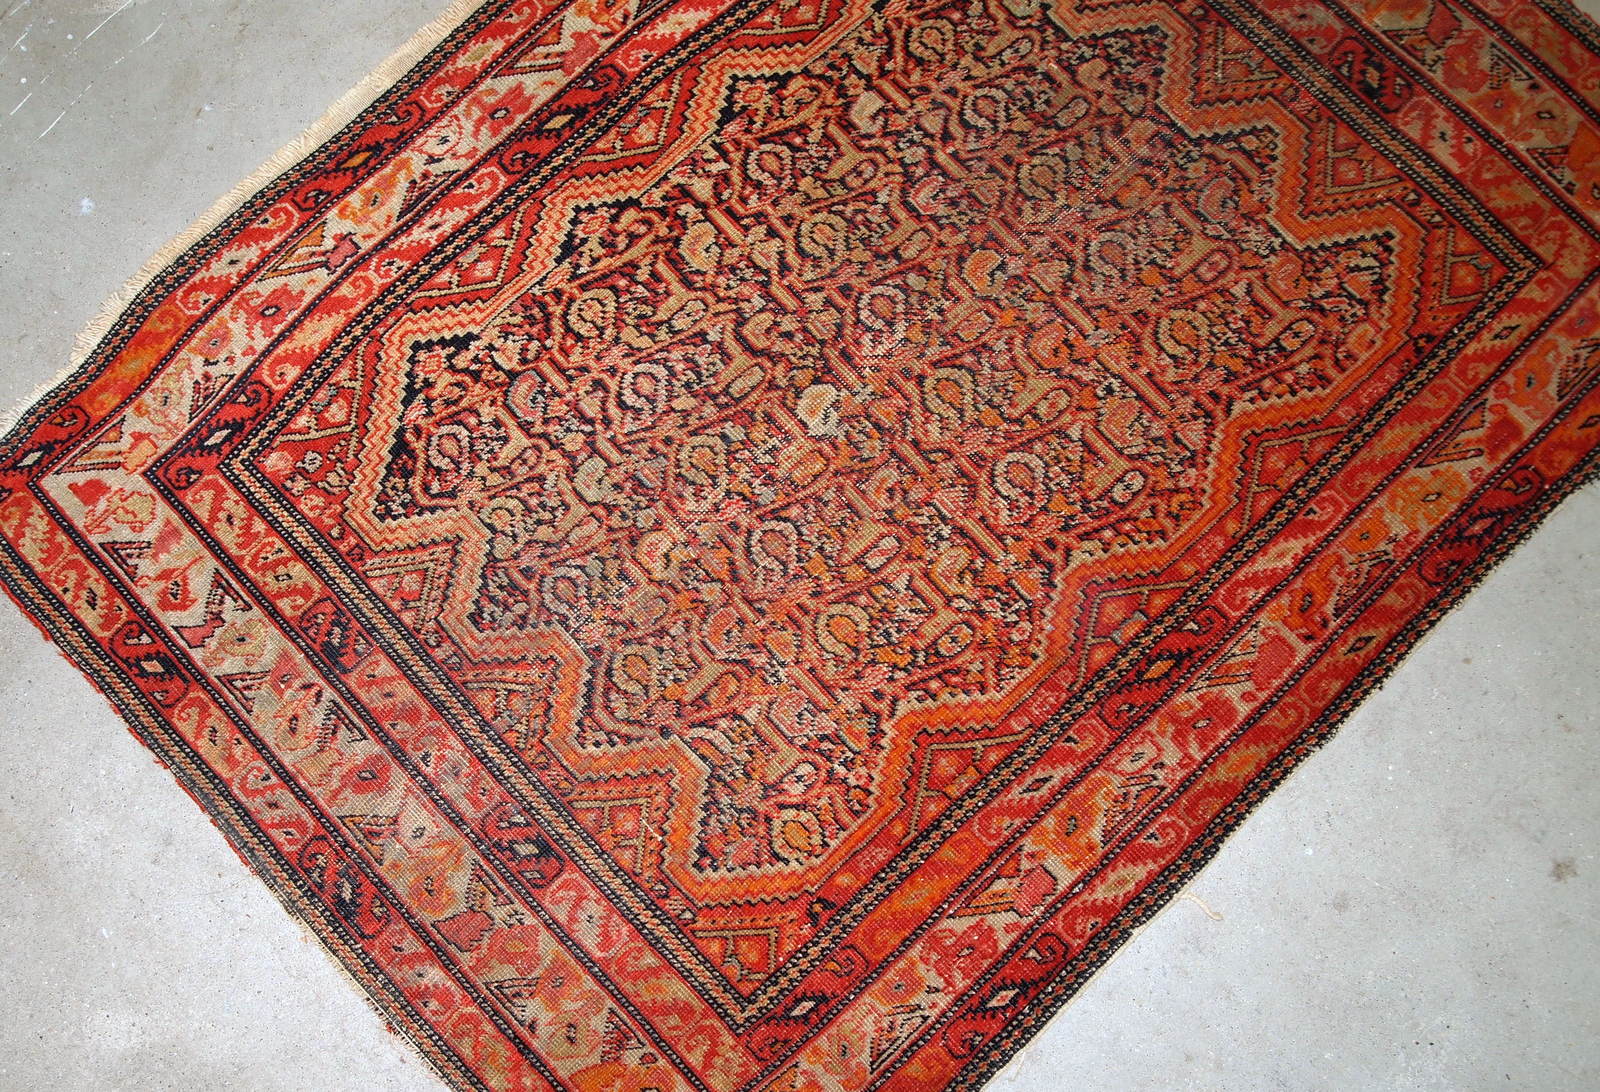 Handmade antique collectible Persian Mishan Malayer rug. This fine-weaved rug made in the end of 19th century and it is in original good condition, it has some low pile.